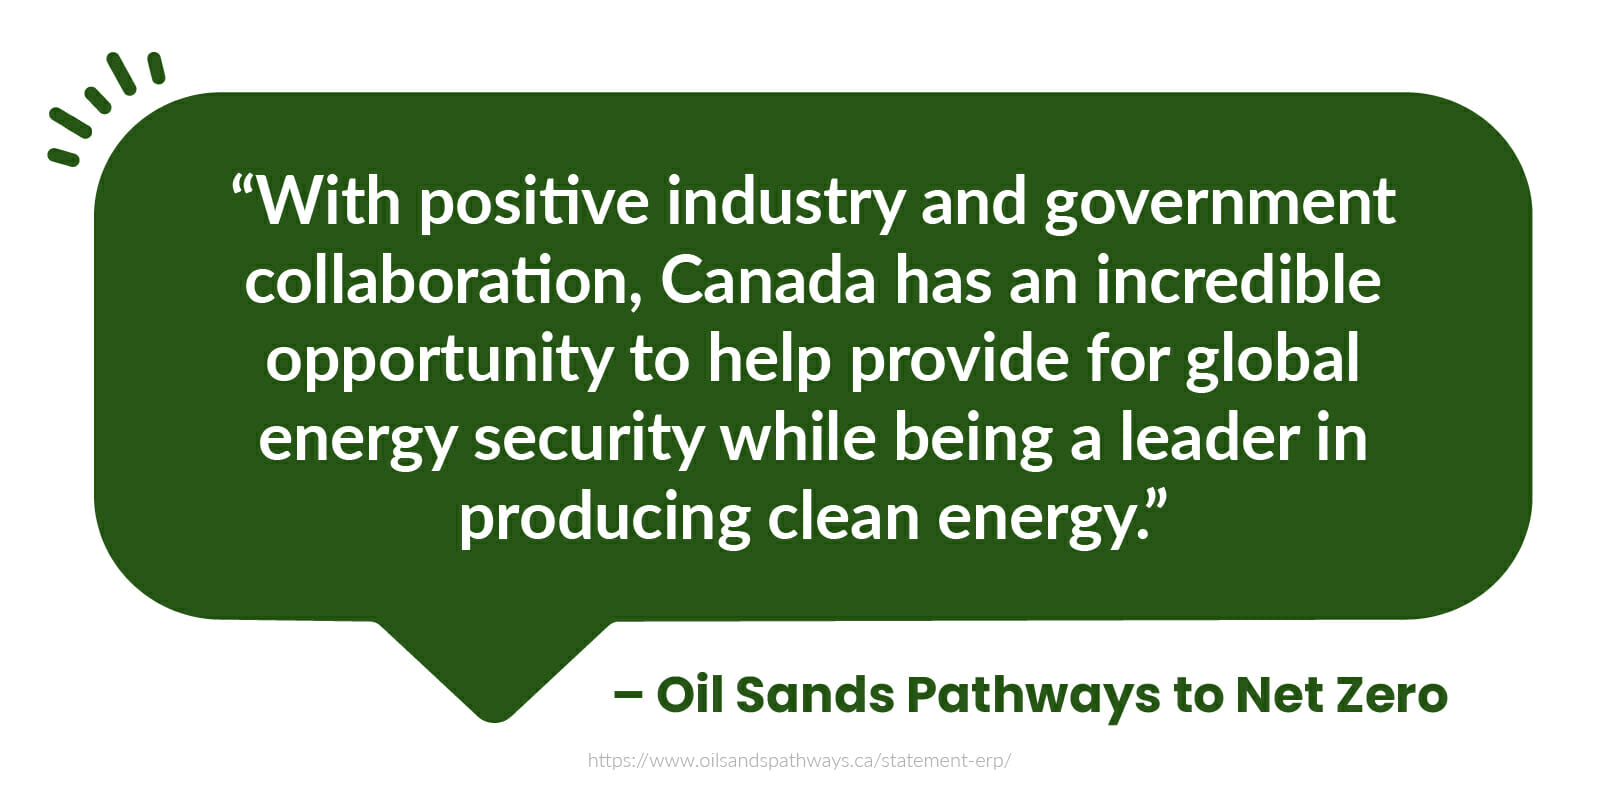  “With positive industry and government collaboration, Canada has an incredible opportunity to help provide for global energy security while being a leader in producing clean energy.” - Oil Sands Pathway to Net Zero